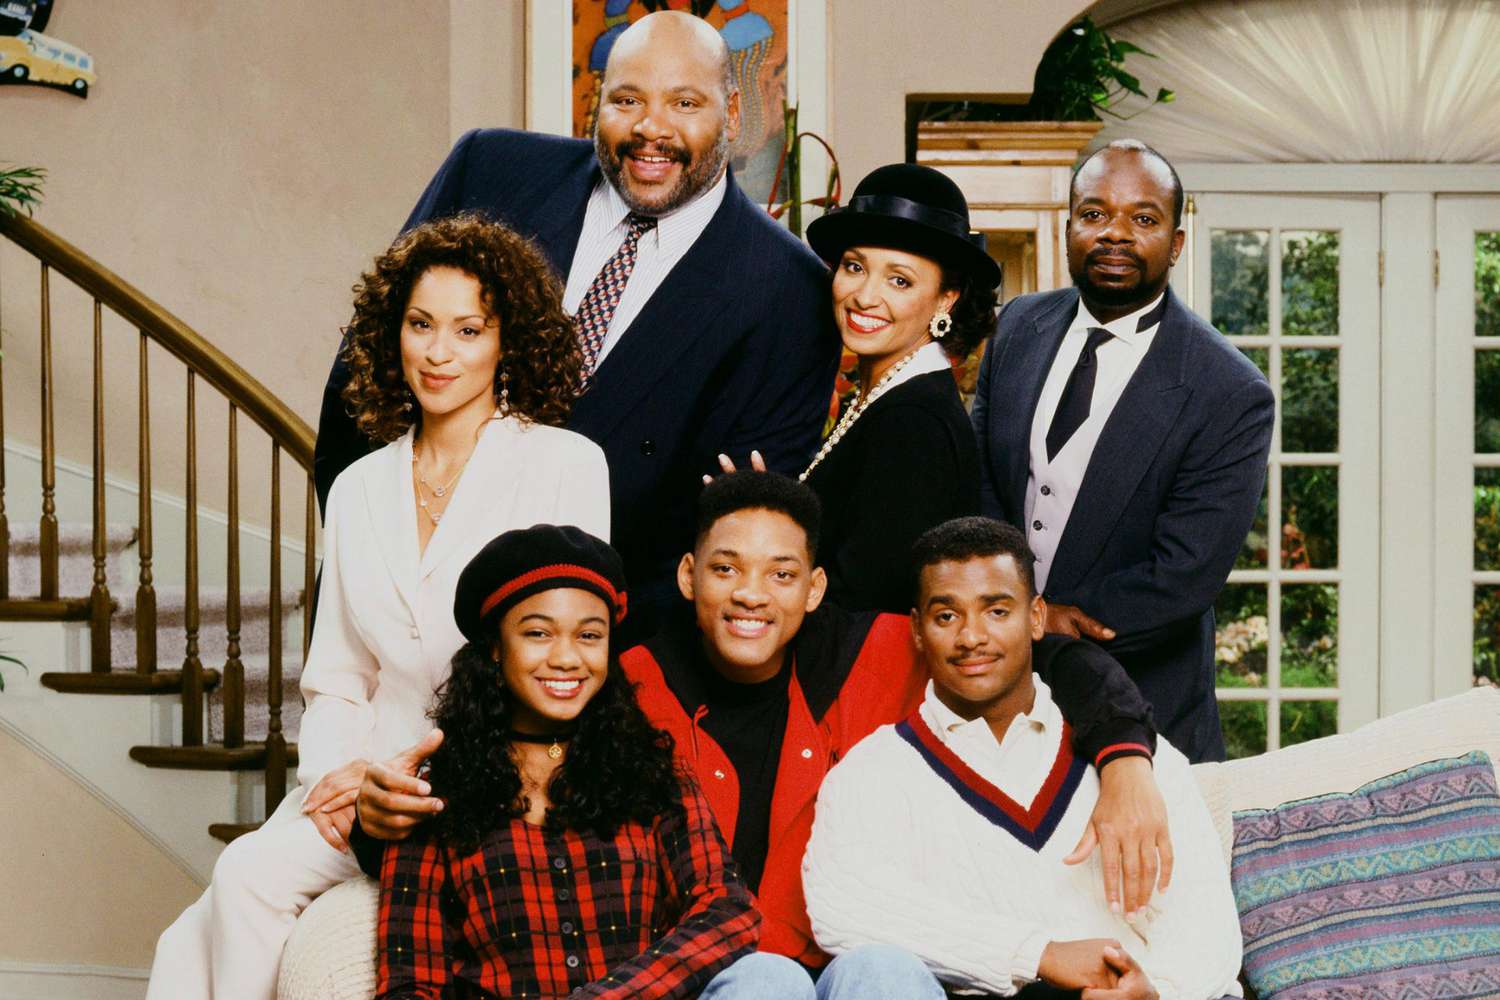 fresh prince of bel air reunion hbo max